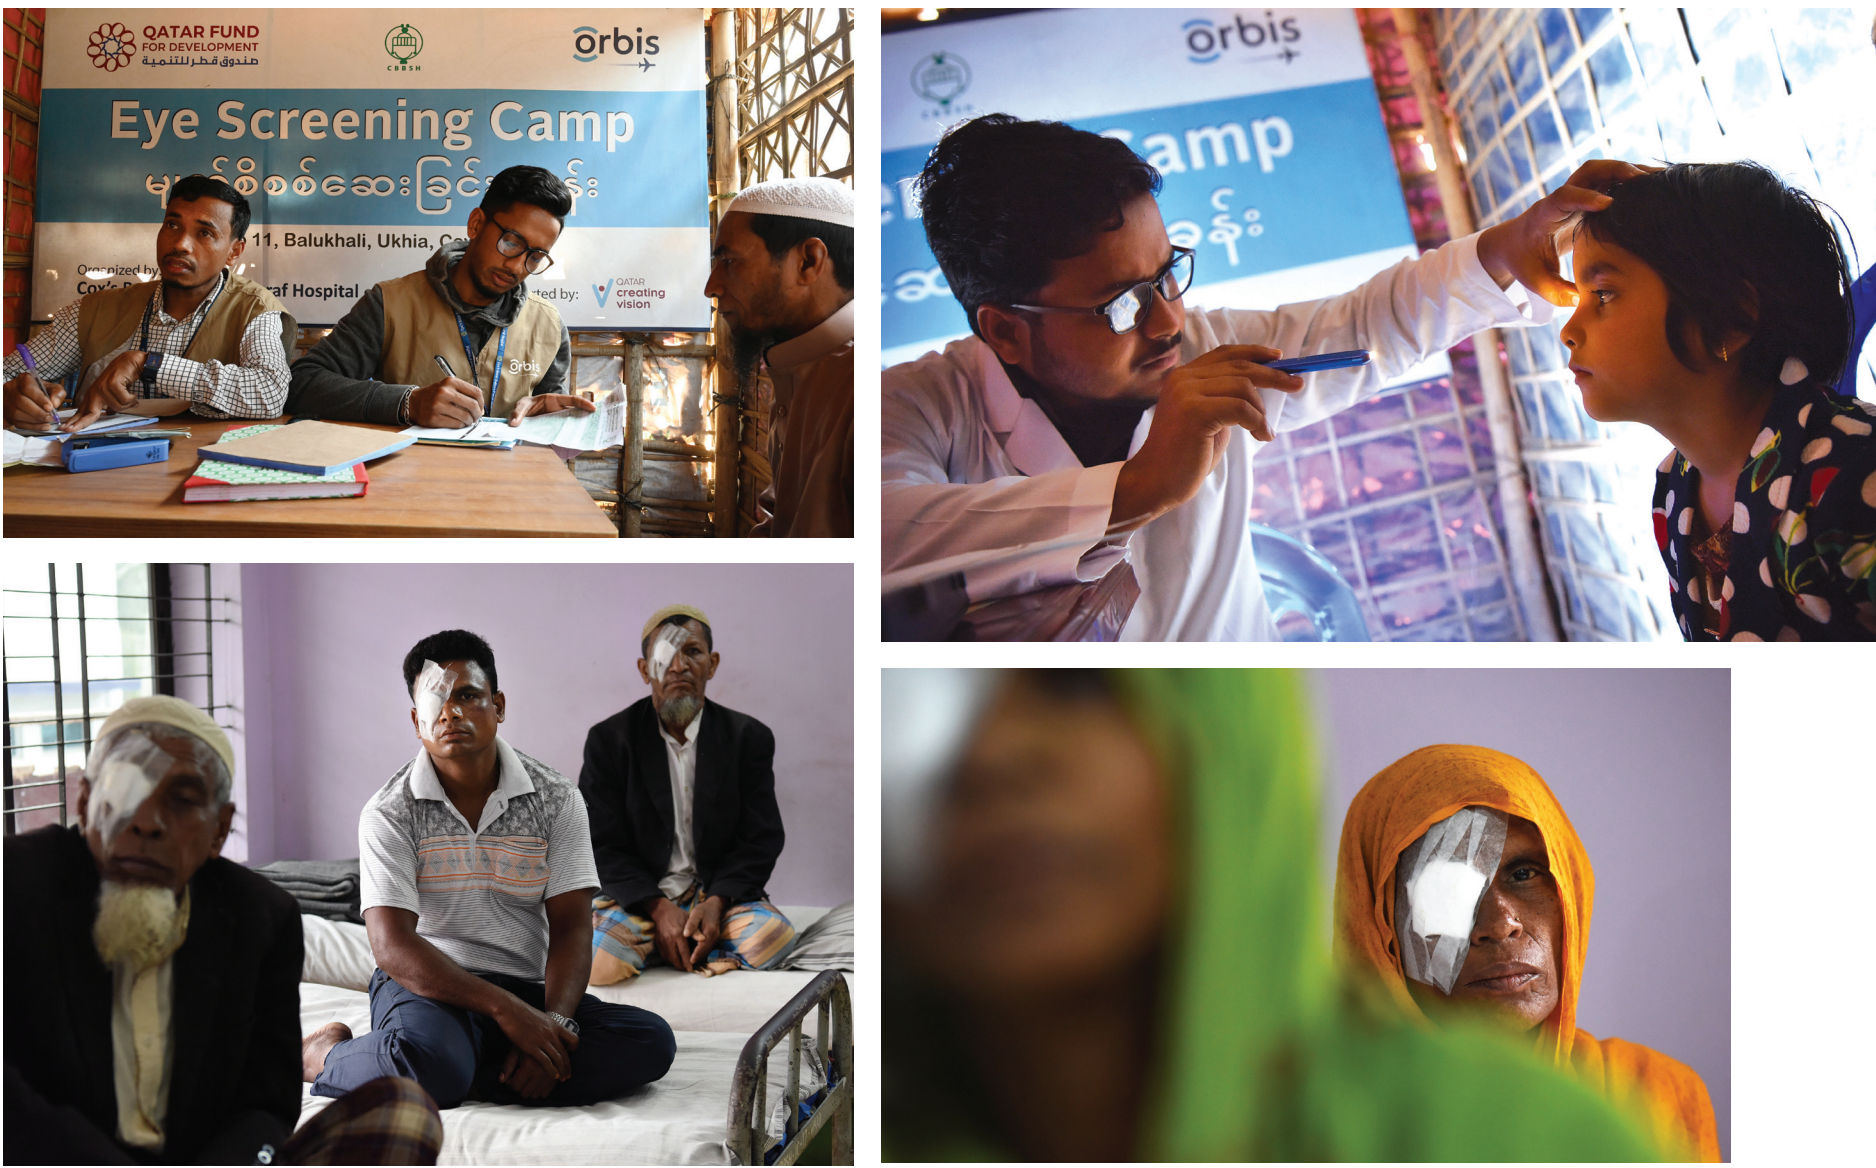 Stepping up to meet visual needs of refugees in Bangladesh